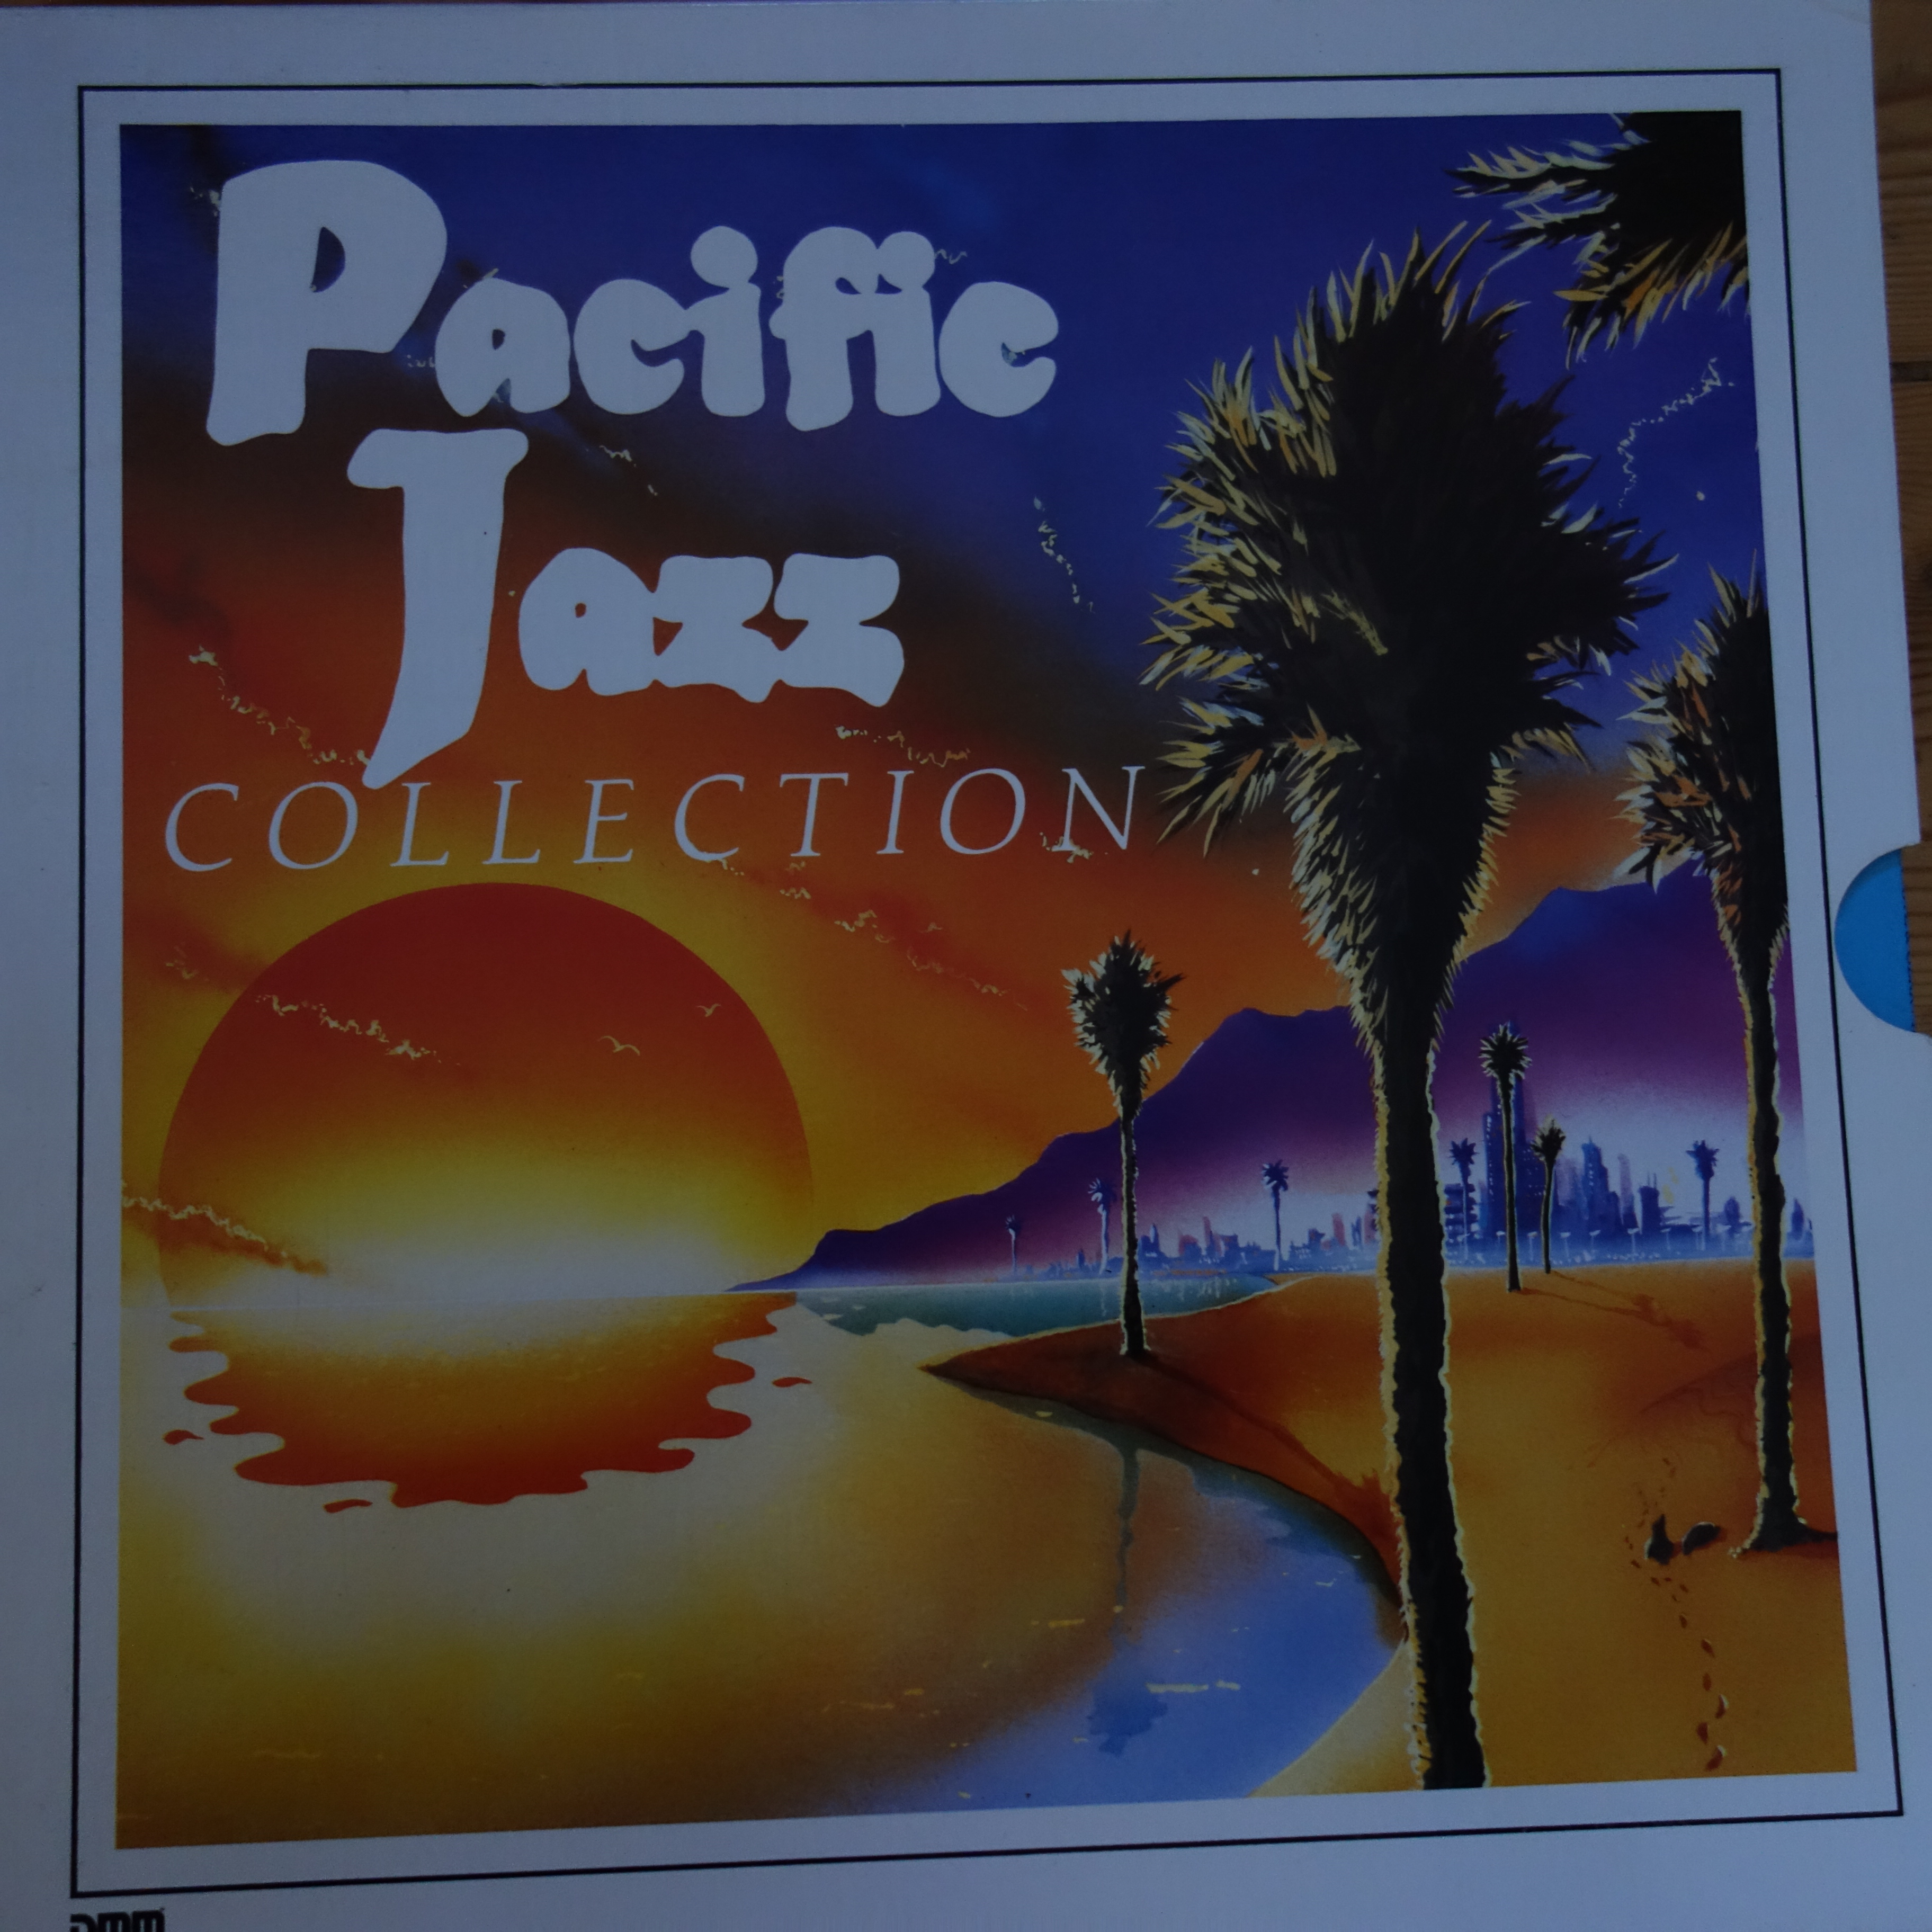 WPX1 Pacific Jazz Collection 6 LP set